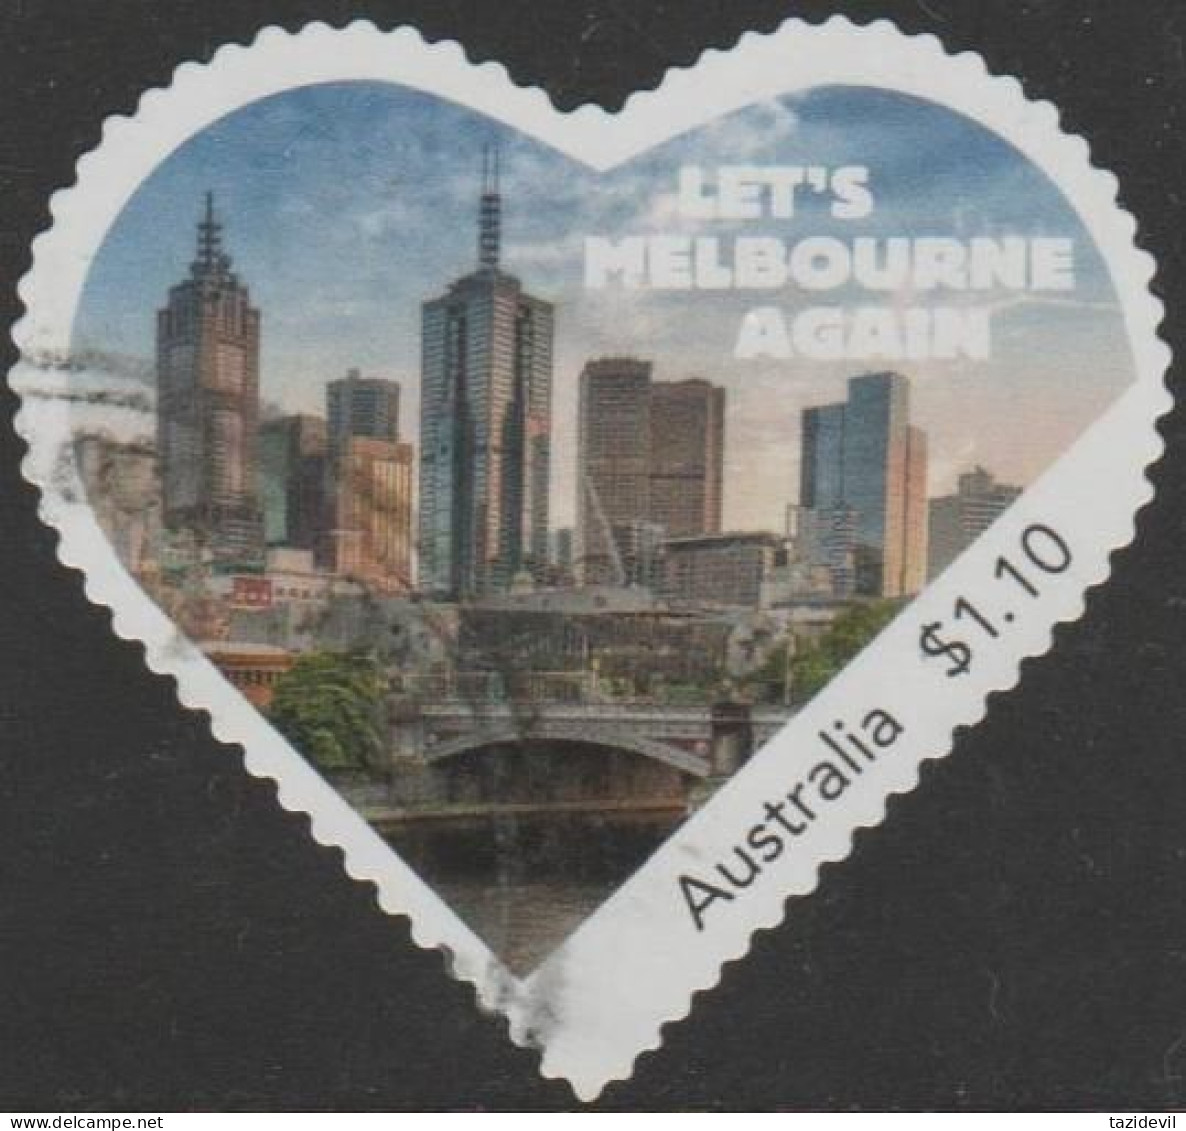 AUSTRALIA - DIE-CUT - USED - 2020 $1.10 Let's Melbourne Again - After Covid - Used Stamps